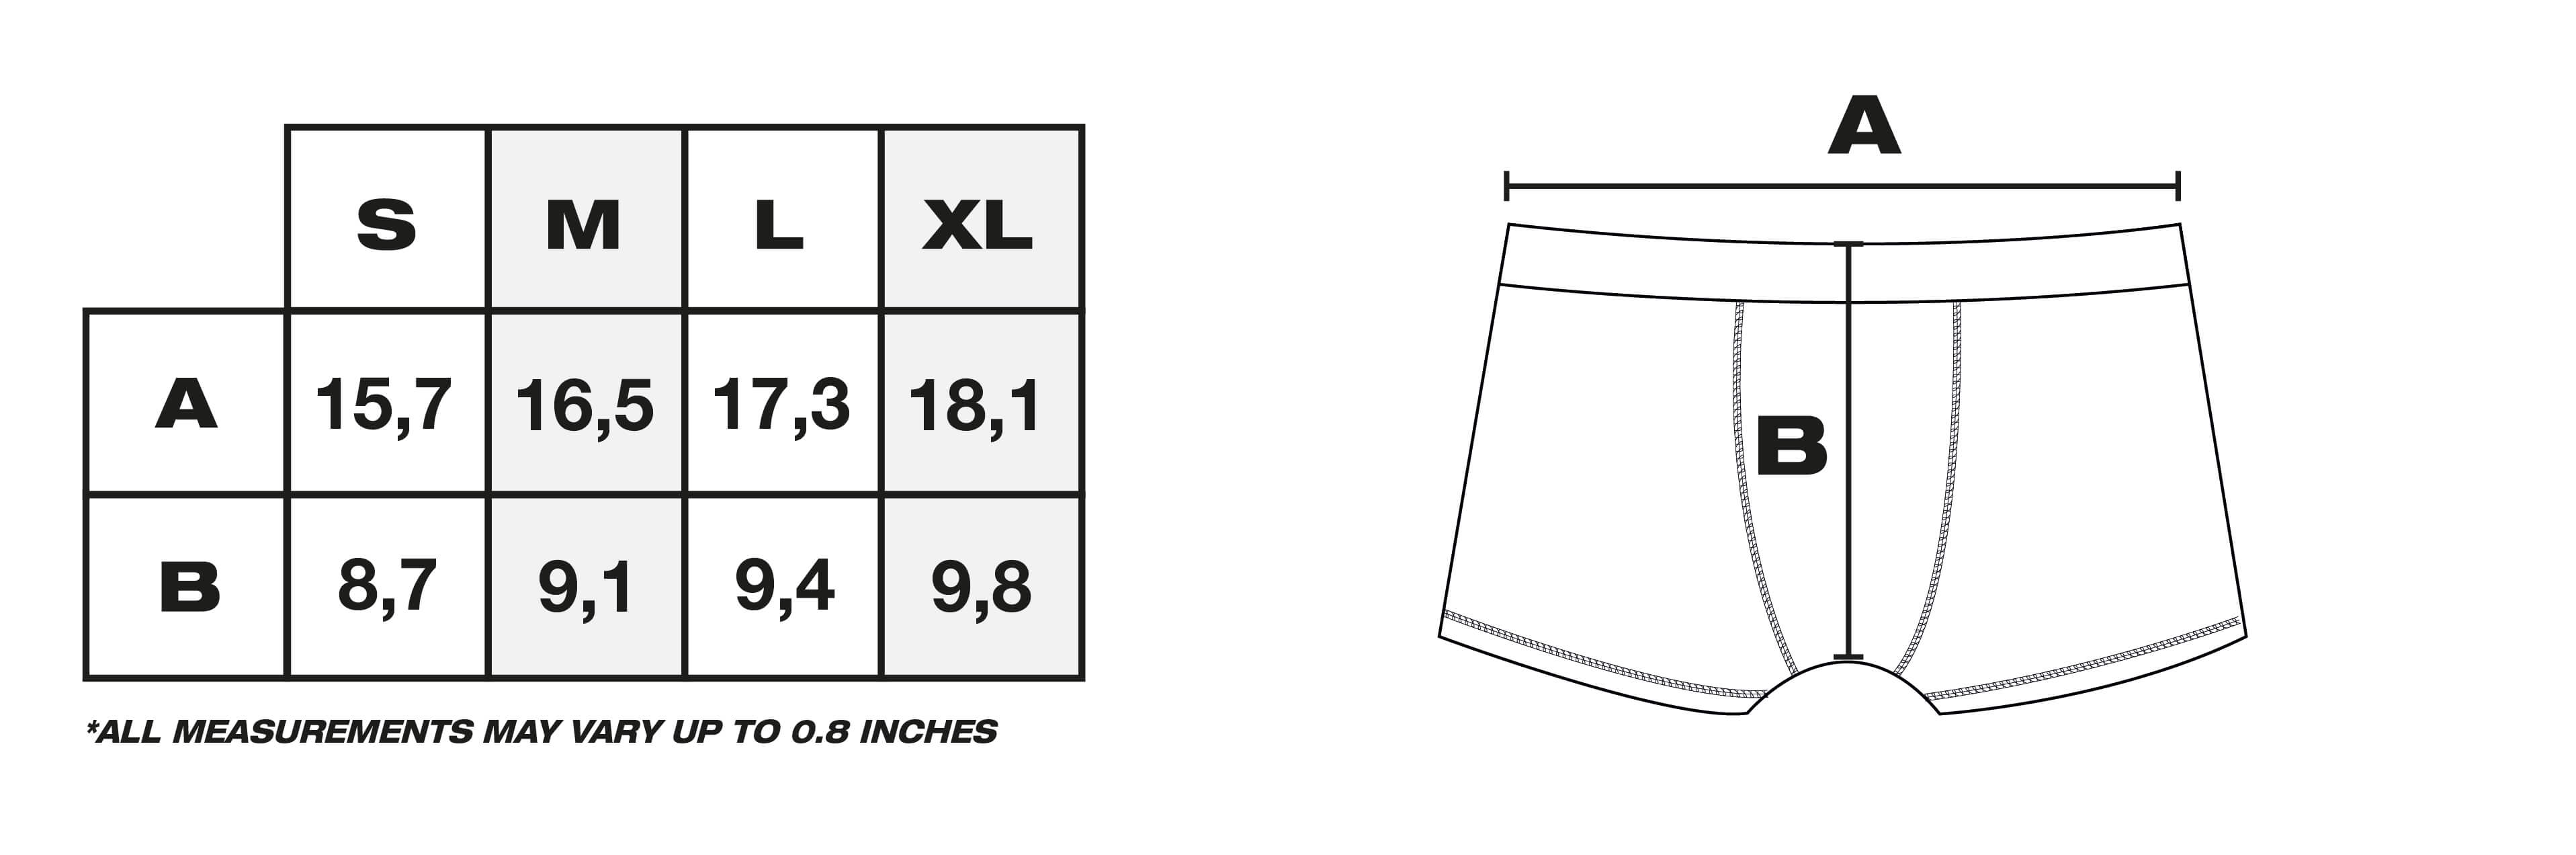 Size Guide in Inches